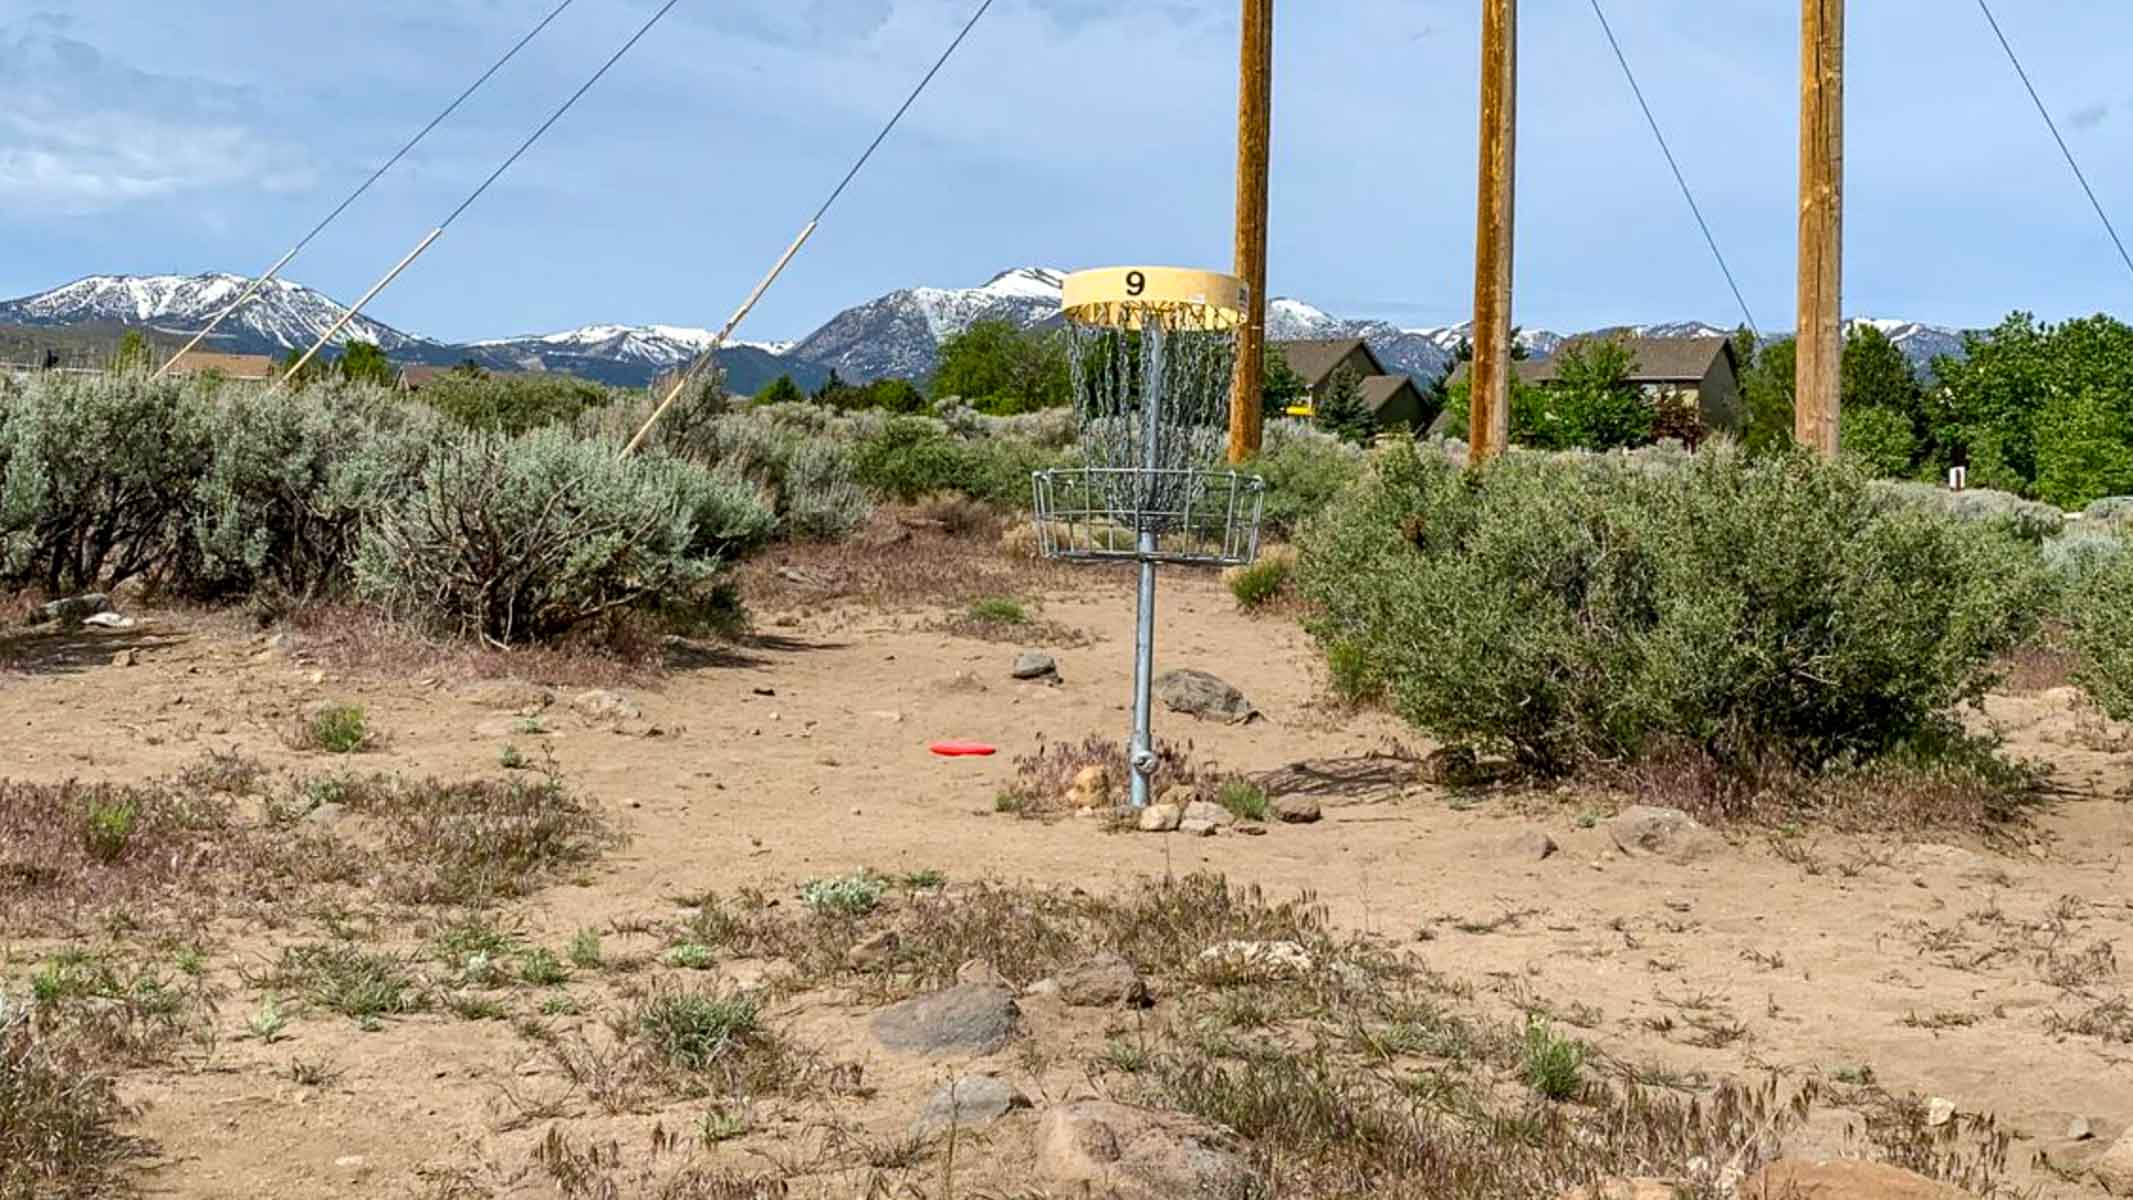 Hole 9 at The Wedge Disc Golf Course in Reno, NV